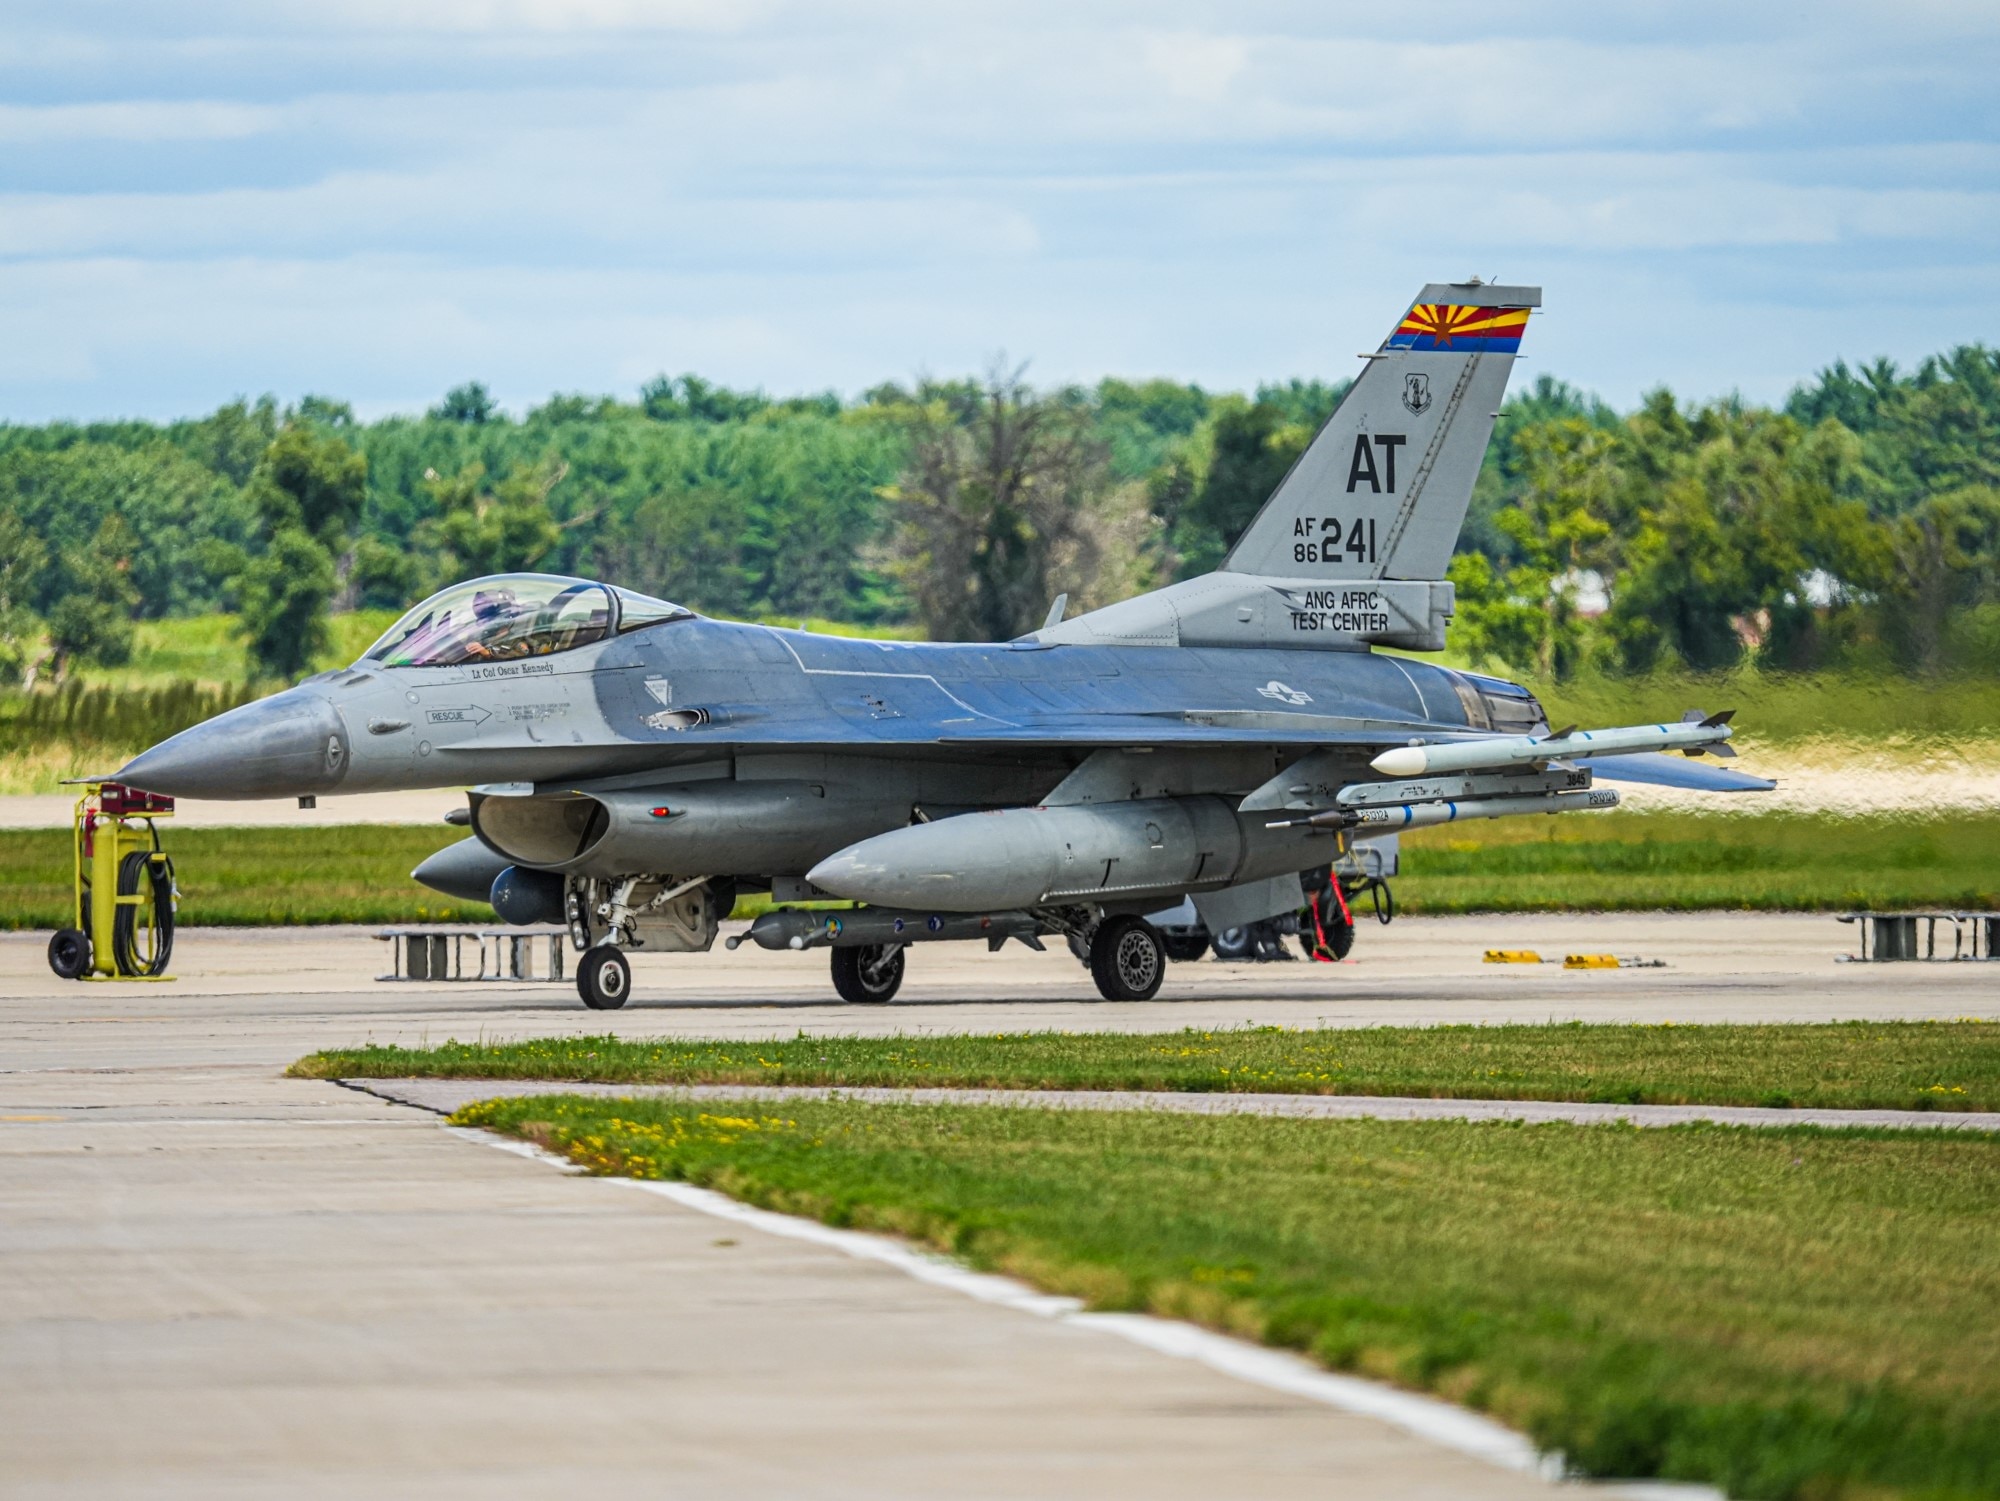 A U.S. Air Force F-16 Fighting Falcon flown by the Air National Guard – Air Force Reserve Command Test Center (AATC) departs Volk Field Air National Guard Base, August 9, 2022, as part of the annual Northern Lightning exercise. AATC accomplishes Operational Test & Evaluation and supports Developmental Test & Evaluation, Tactics Development, and Evaluation for all Air Reserve Component (ARC) weapons systems. (U.S. Air National Guard photo by Kristen Keehan)